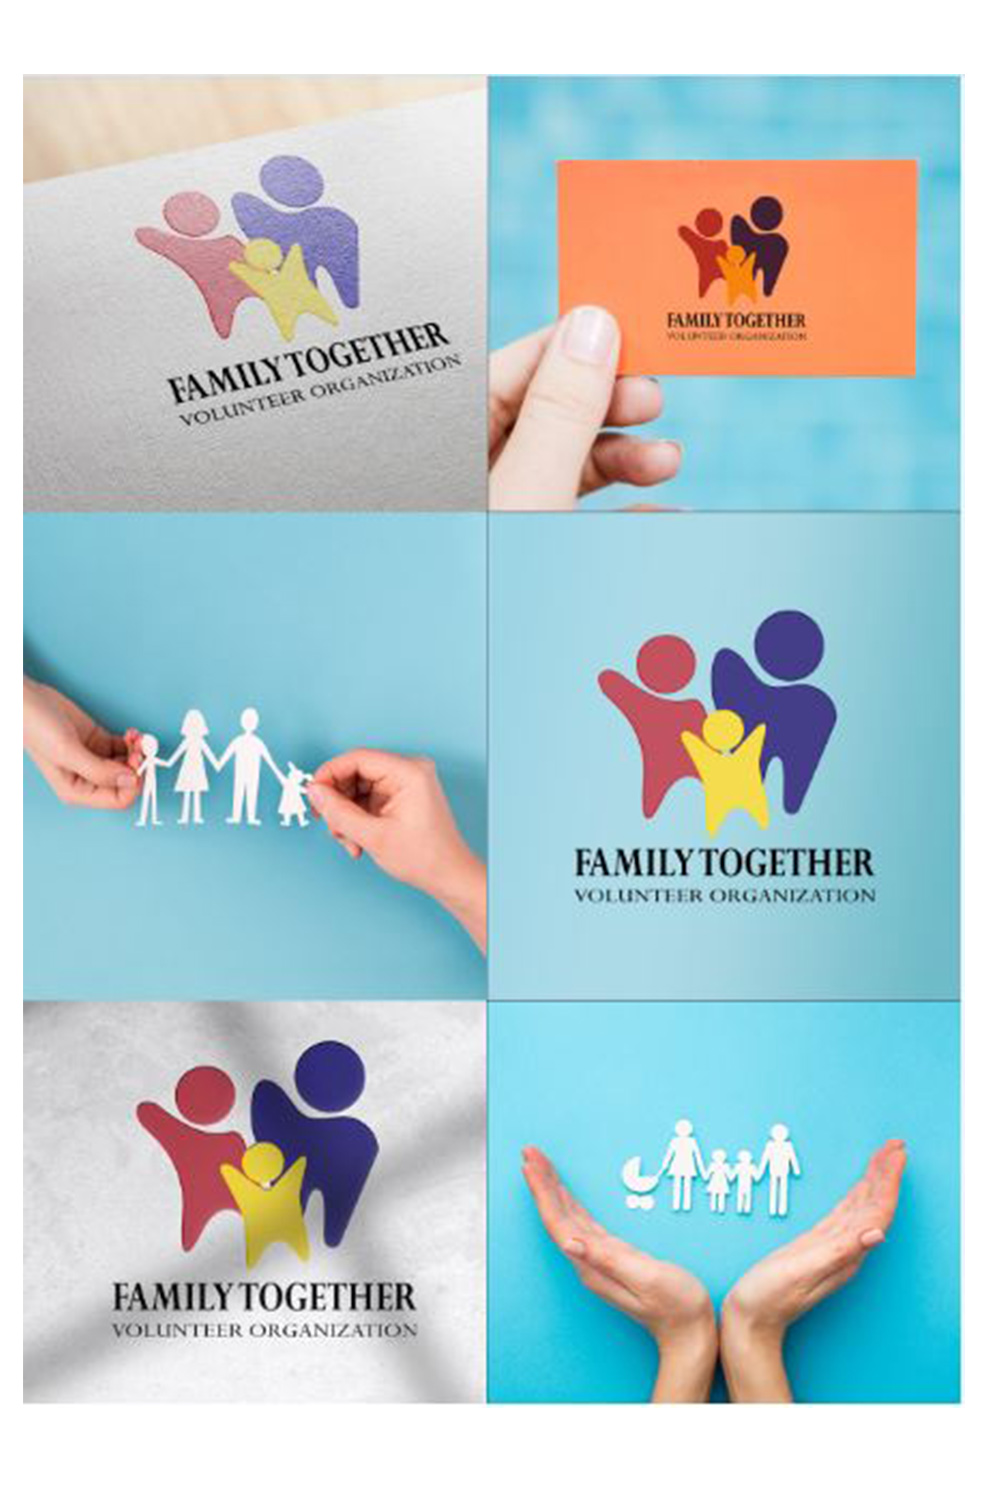 Person holding a family together logo.